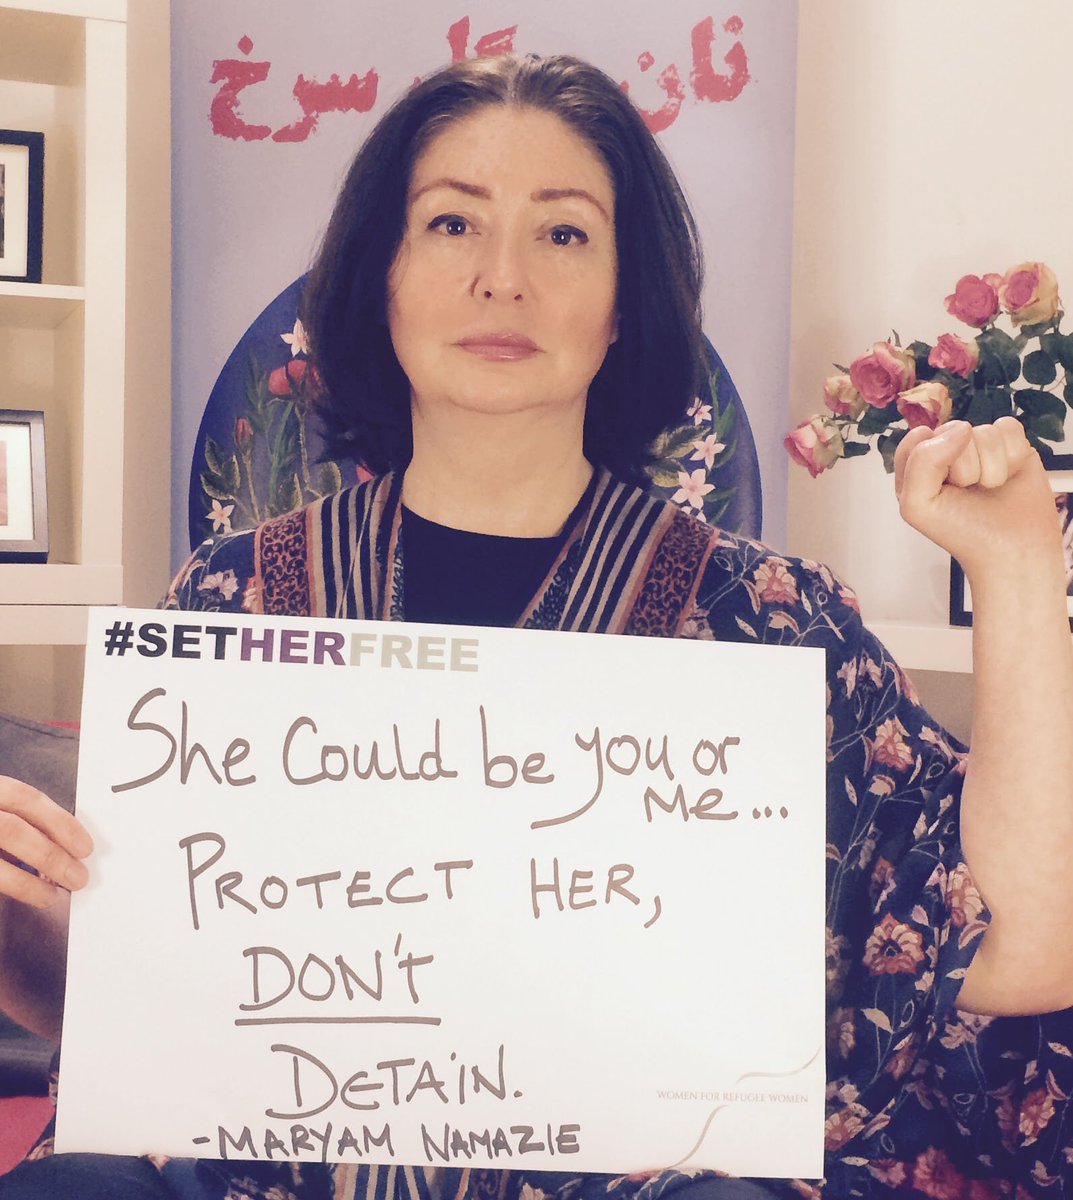 She could be you or me. Protect don't detain. 
@4refugeewomen, #99women
#setherfree
tinyurl.com/hxtxvfh